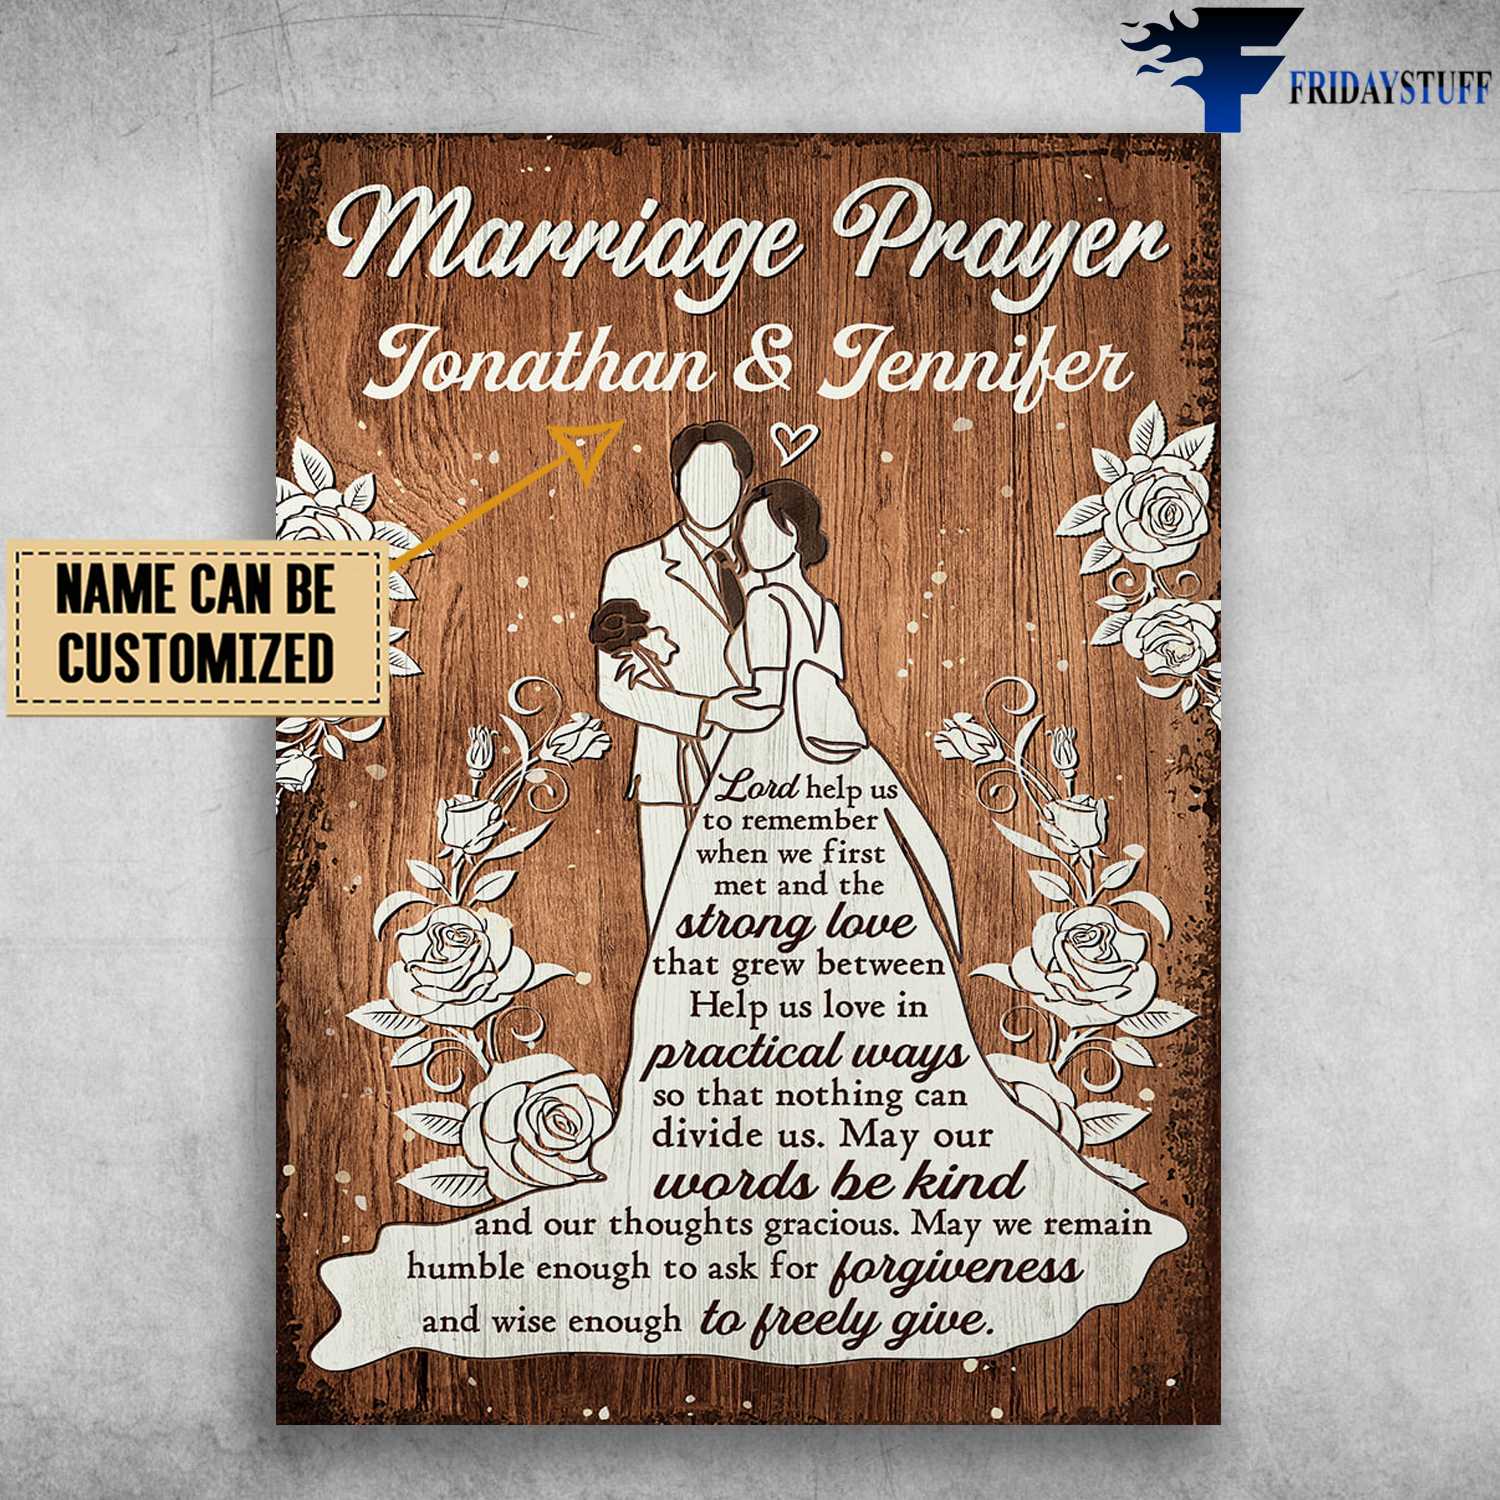 Wedding Couple - Marriage Prayer, Lord Help Us To Remember, When We First Met And The Strong Love, That Grew Between, Help Us Love In Practical Ways